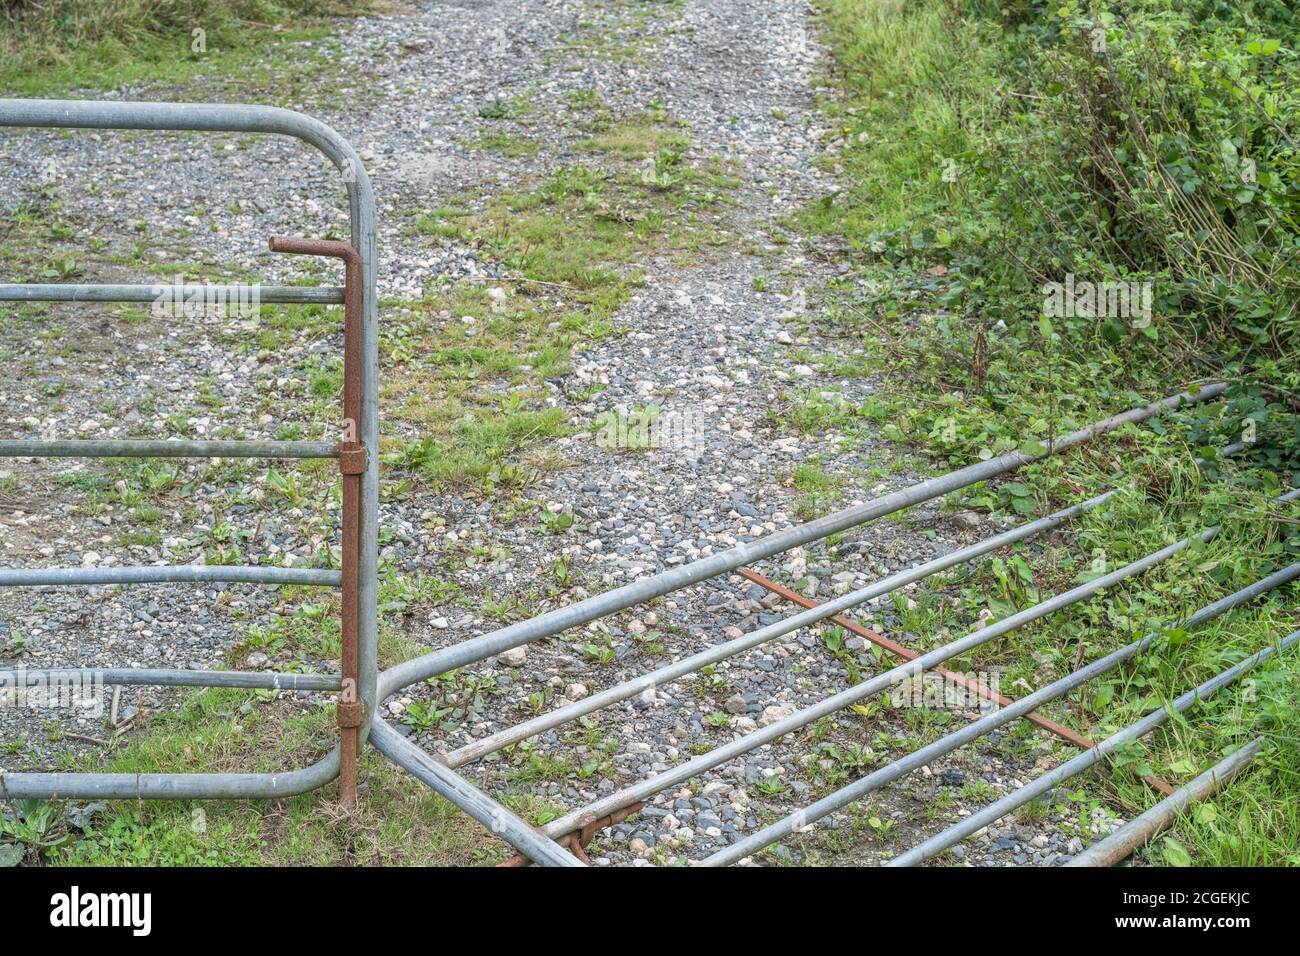 Collapsed galvanized steel farm gate. For falling profits in UK, farm incomes collapsing, falling incomes for farmers, commodity price falls. Stock Photo